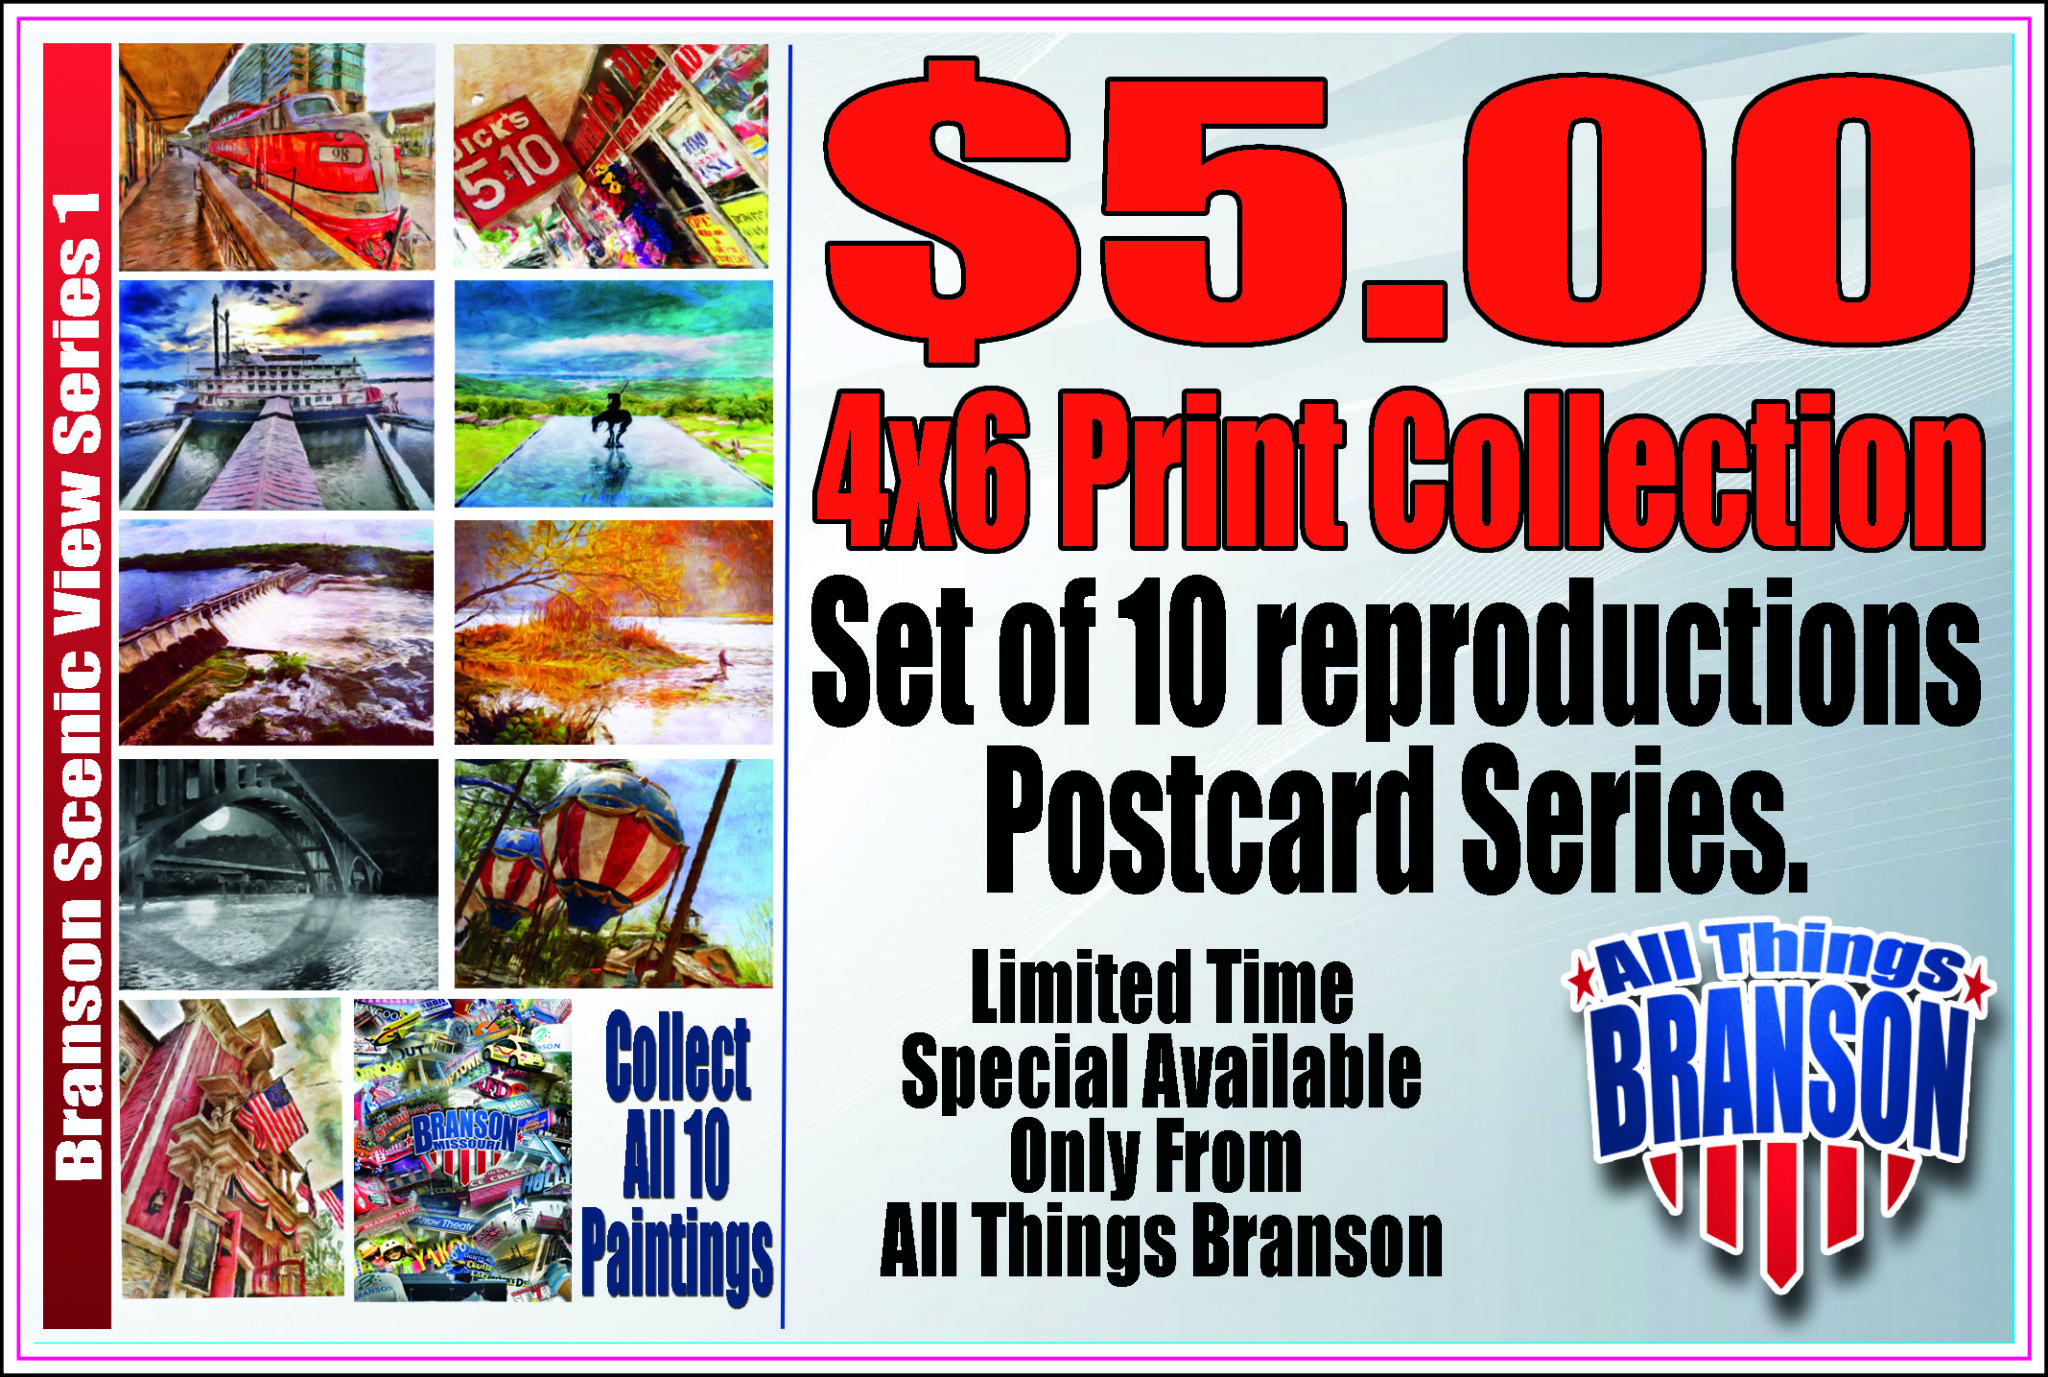 Branson Artwork Collection Series Now Available.